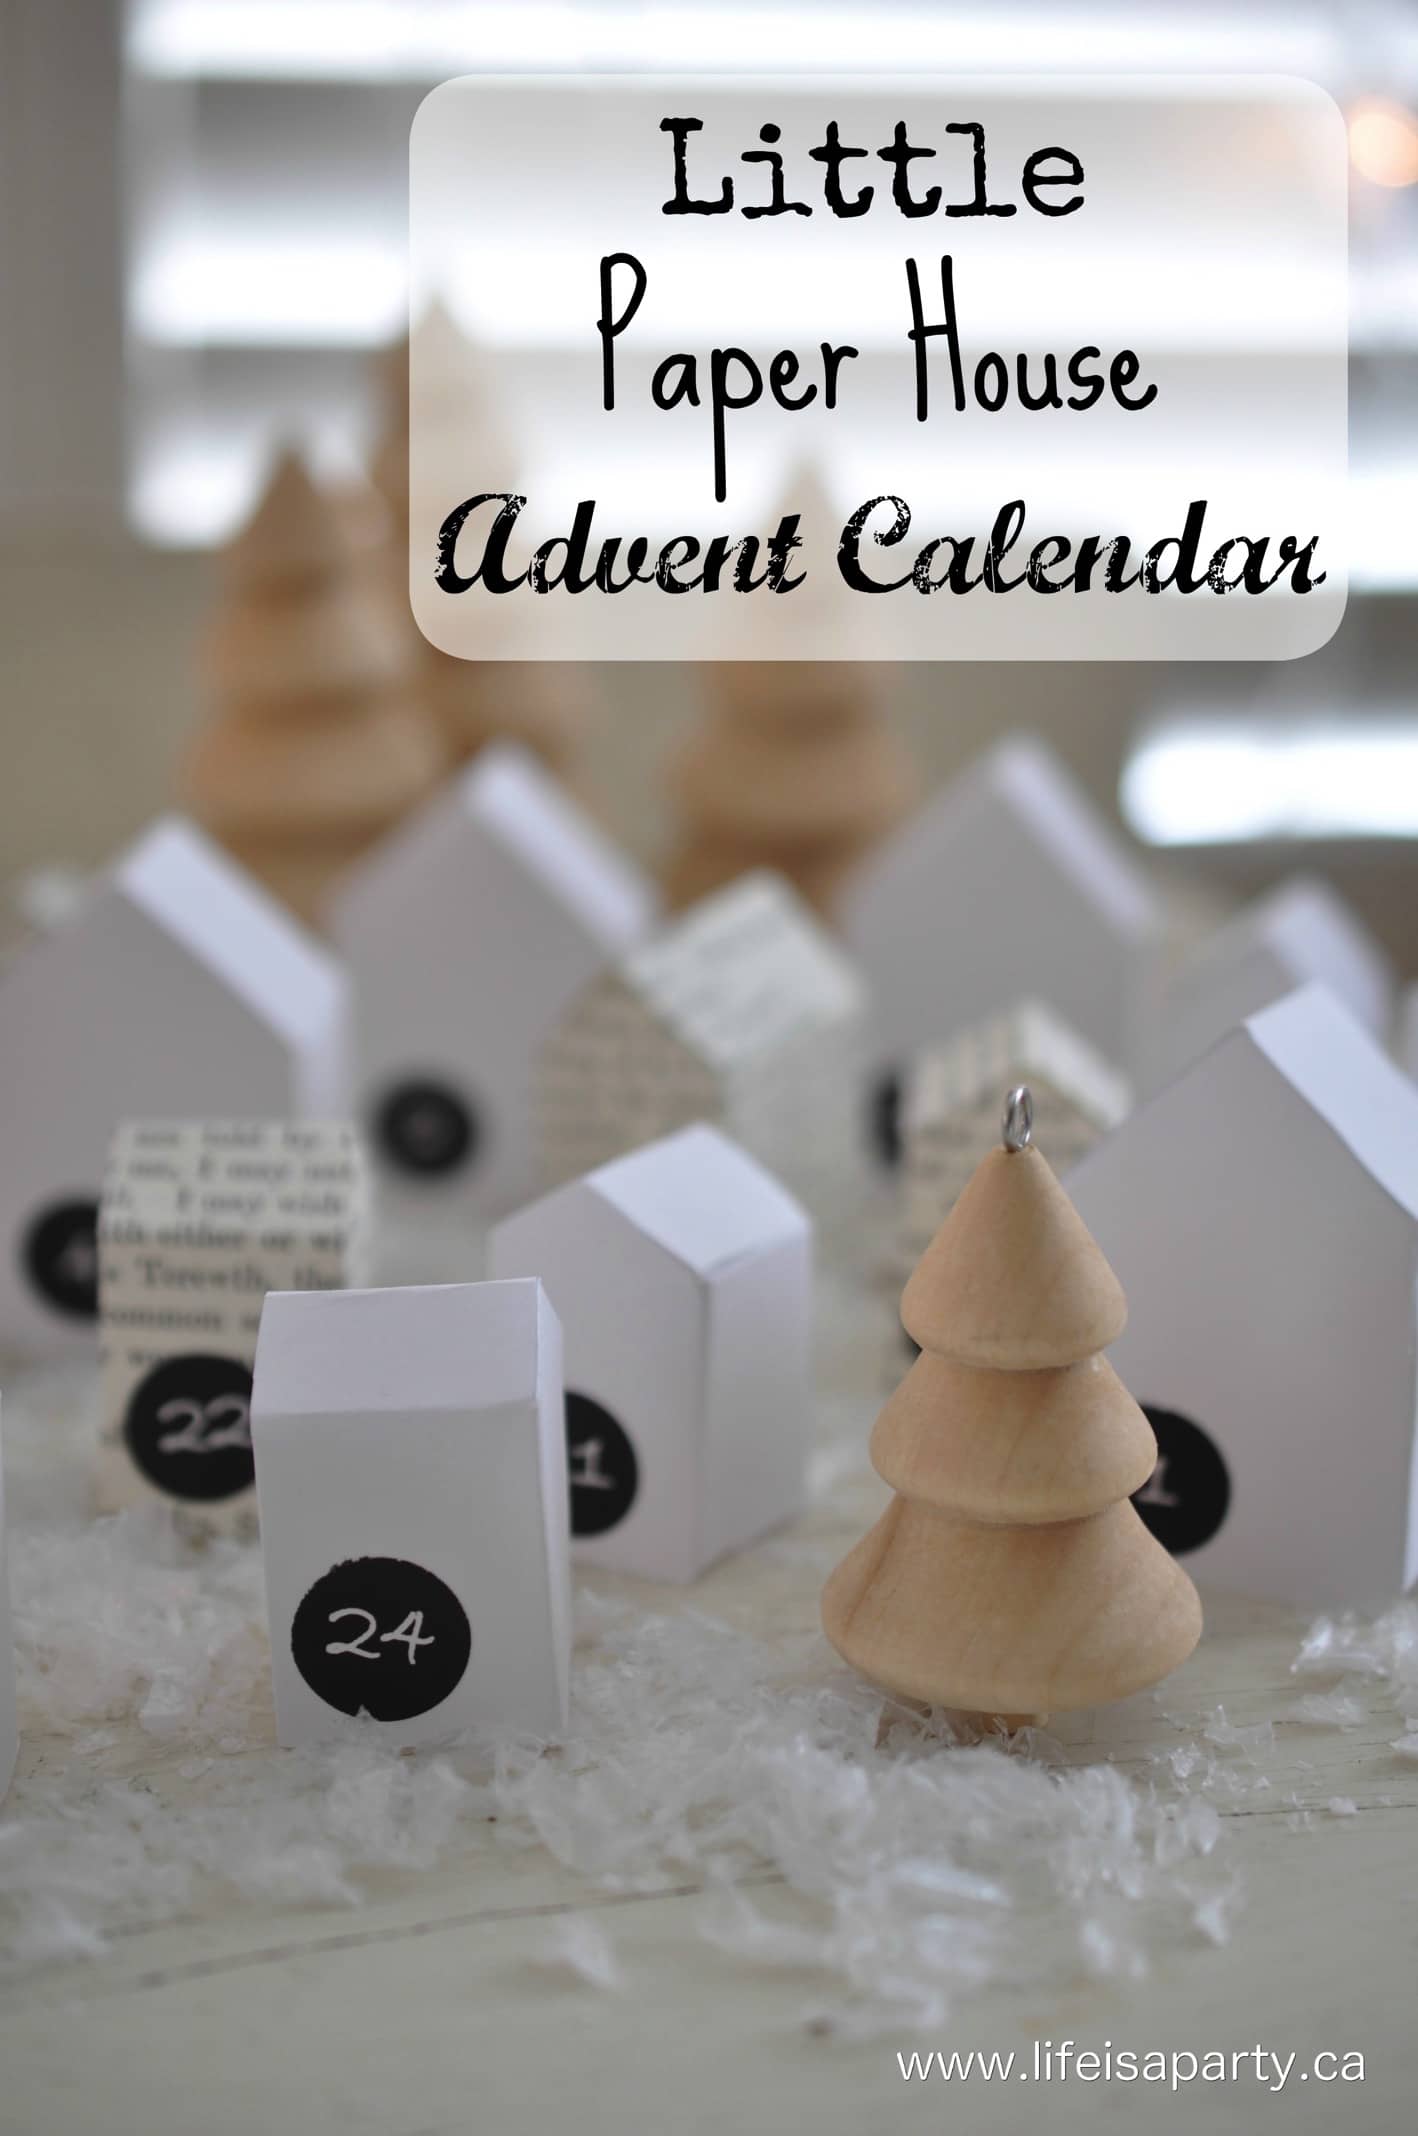 DIY House Advent Calendar: A pattern for 3 sizes of paper houses, and printable number labels to make your own advent village.